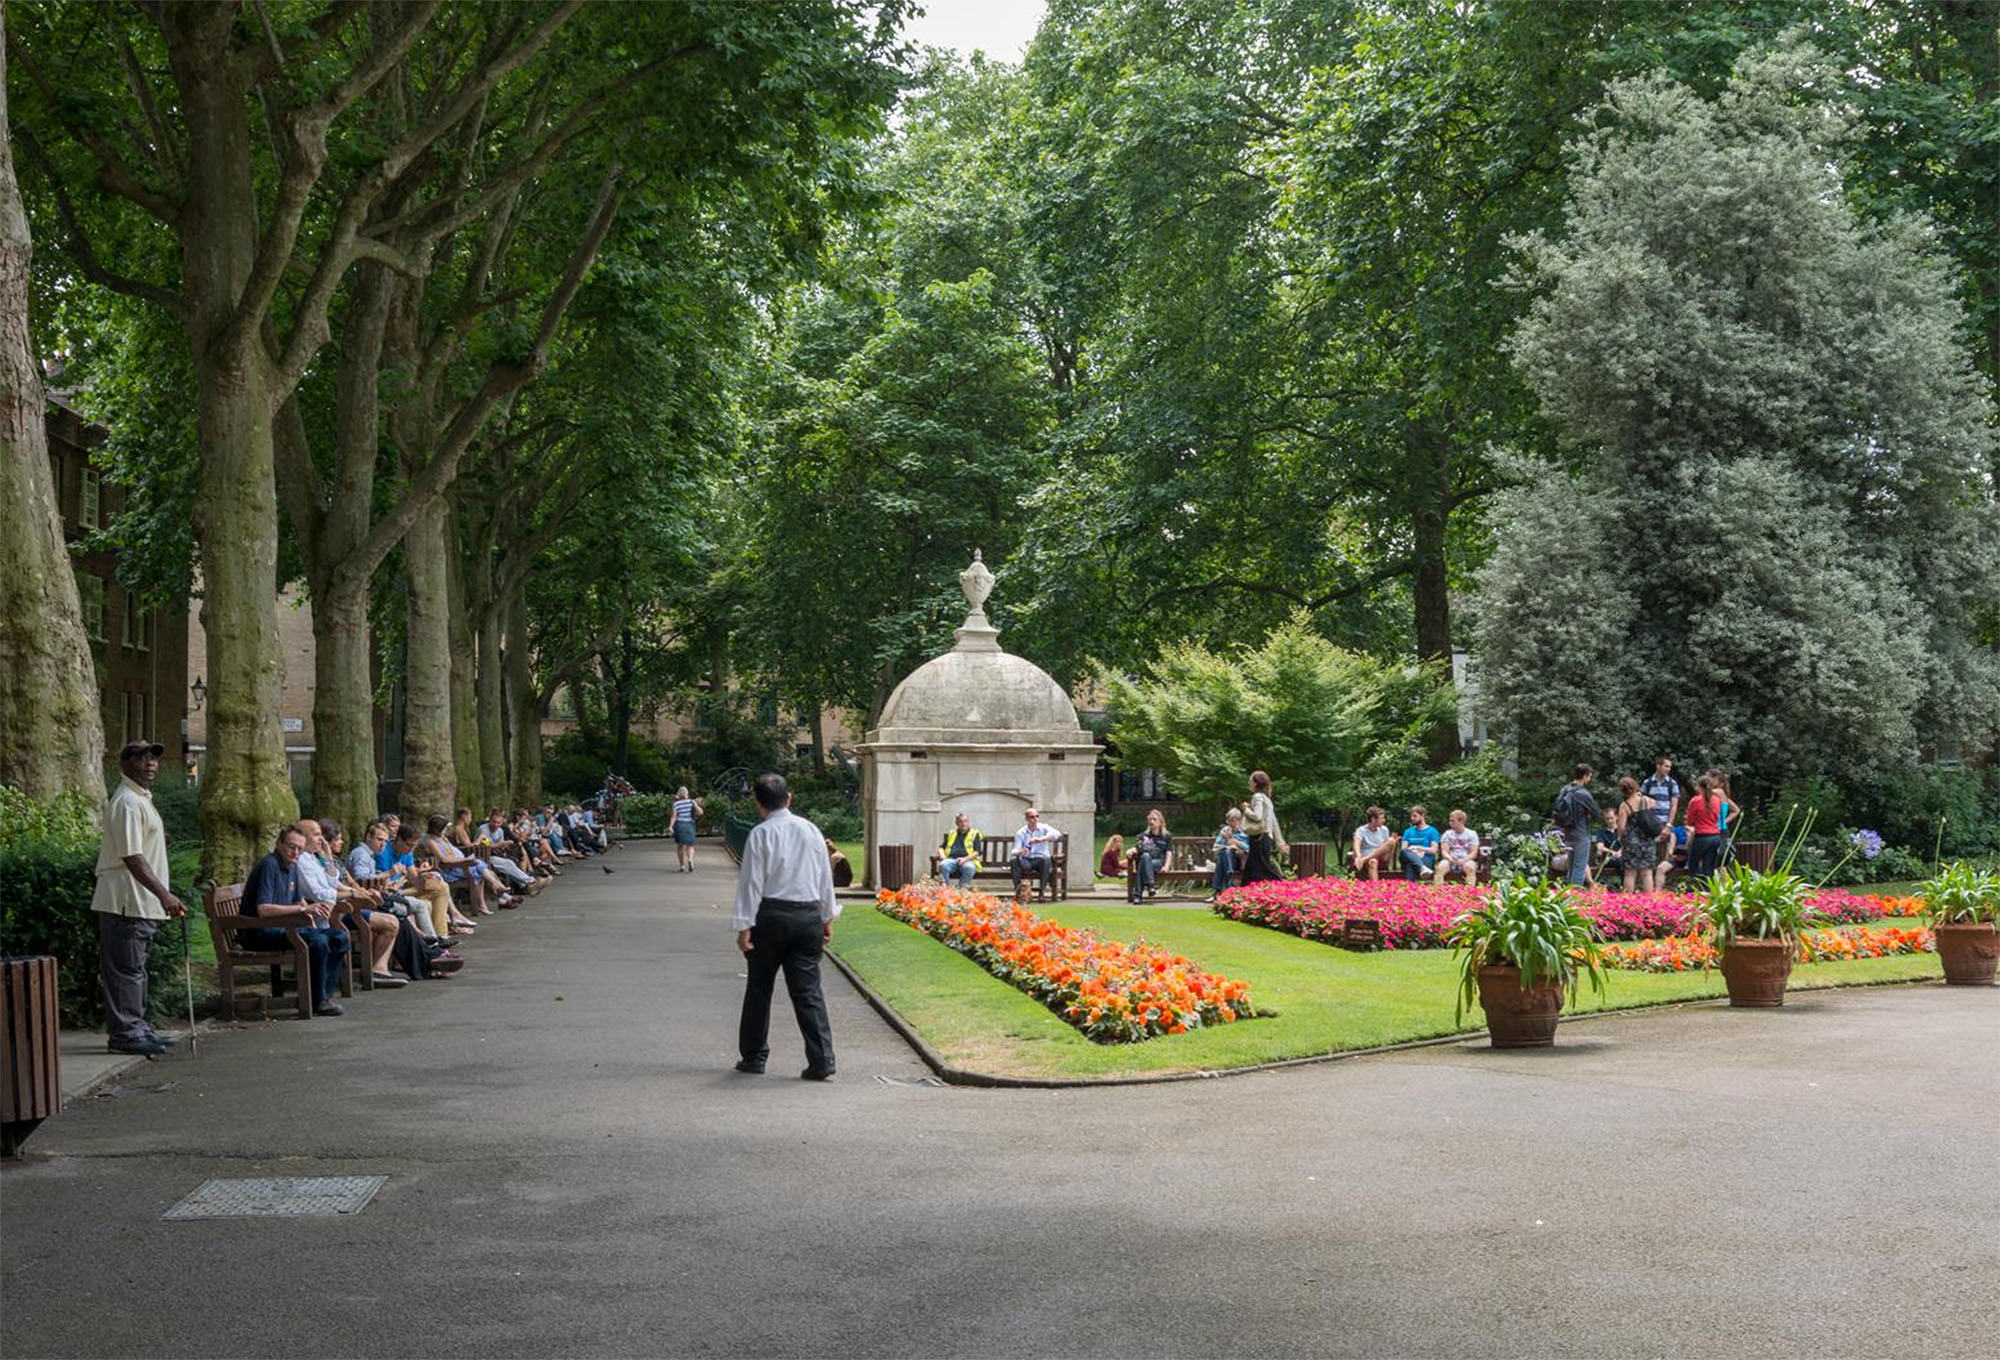 People seated on benches around flower beds in a park with a mausoleum in the background